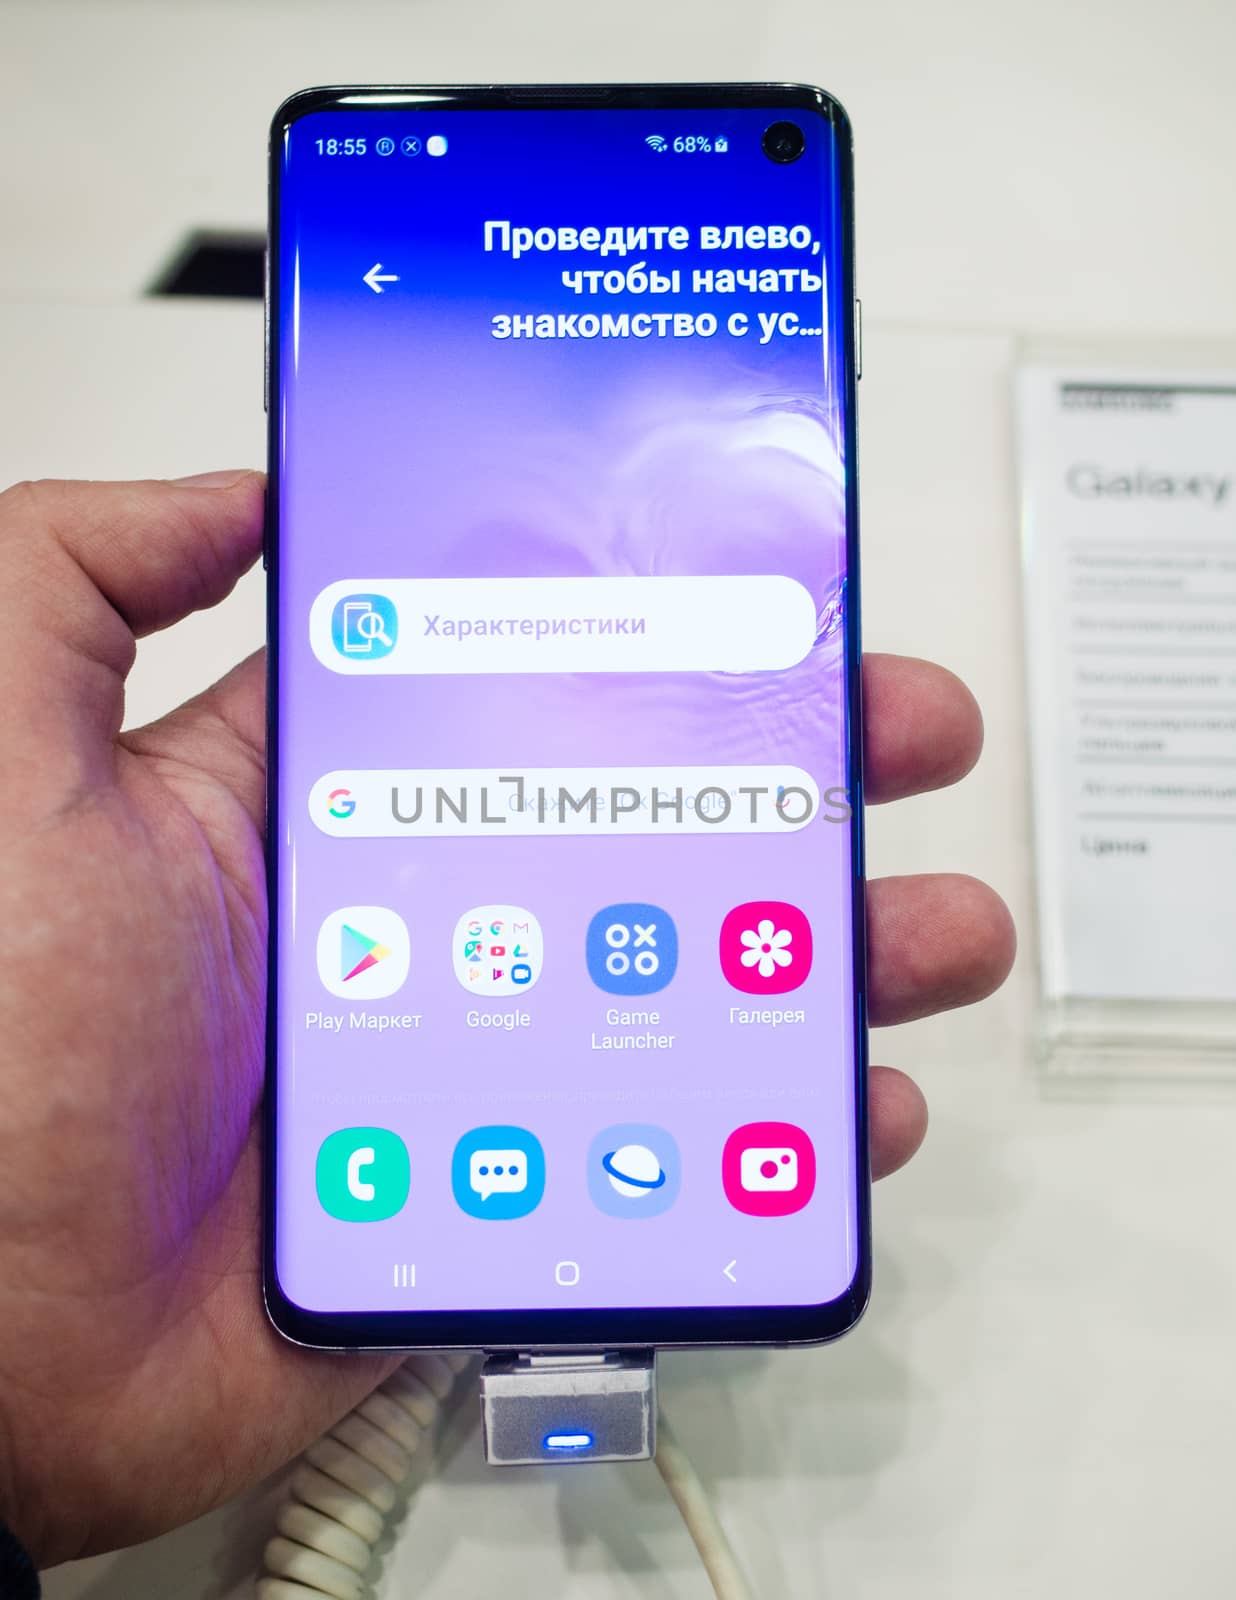 February 28, 2019 Moscow, Russia. The new smartphone from Samsung Galaxy s10 on the shelf in the gadget store.